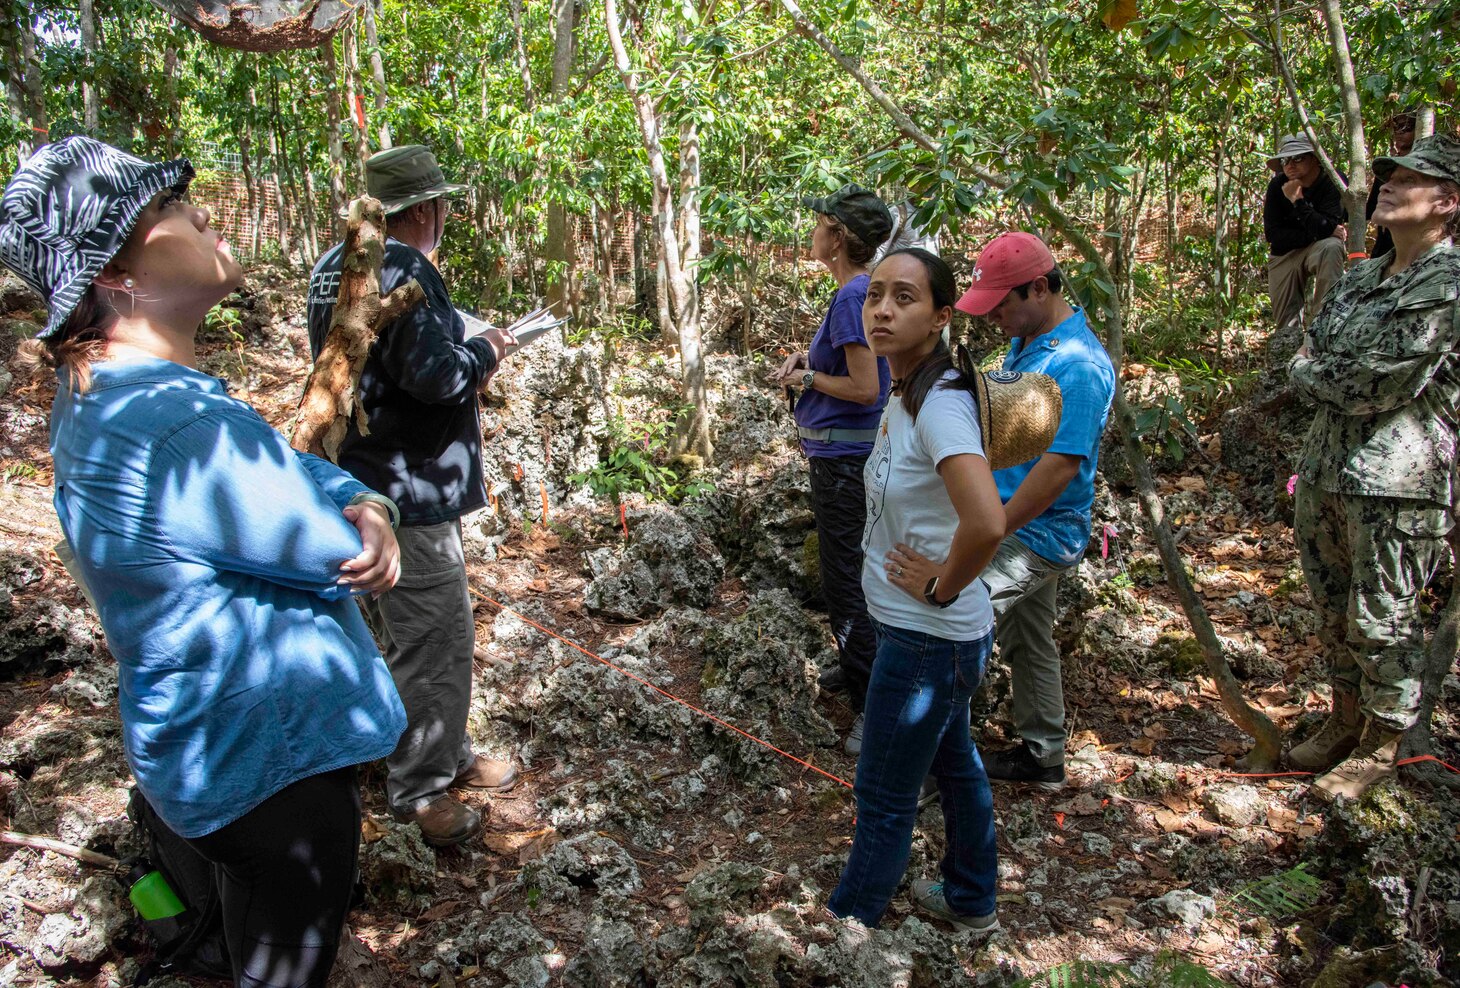 DEDEDO Guam (July 12, 2019) - Senators from the 35th Guam Legislature view the endangered Serianthes nelsonii tree while receiving a brief from Dr. Jim McConnell,  University of Guam, Guam Plant Extinction Prevention Program, during a site visit at Northwest Field in Dededo July 12. At the request of Sen. Tina Muna Barnes, speaker of the 35th Guam Legislature, Rear Adm. Shoshana Chatfield, commander, Joint Region Marianas and a team of Navy and Marine Corps environmental professionals led a senatorial visit to the site of the endangered Serianthes nelsonii tree at Northwest Field.  The group received a briefing from Marine Corps Activity Guam (MCAG) Environmental Director Al Borja and MCAG Natural Resources Specialist Lauren Gutierrez, and saw firsthand the military's commitment to environmental stewardship in the preservation of the island's ecosystem.